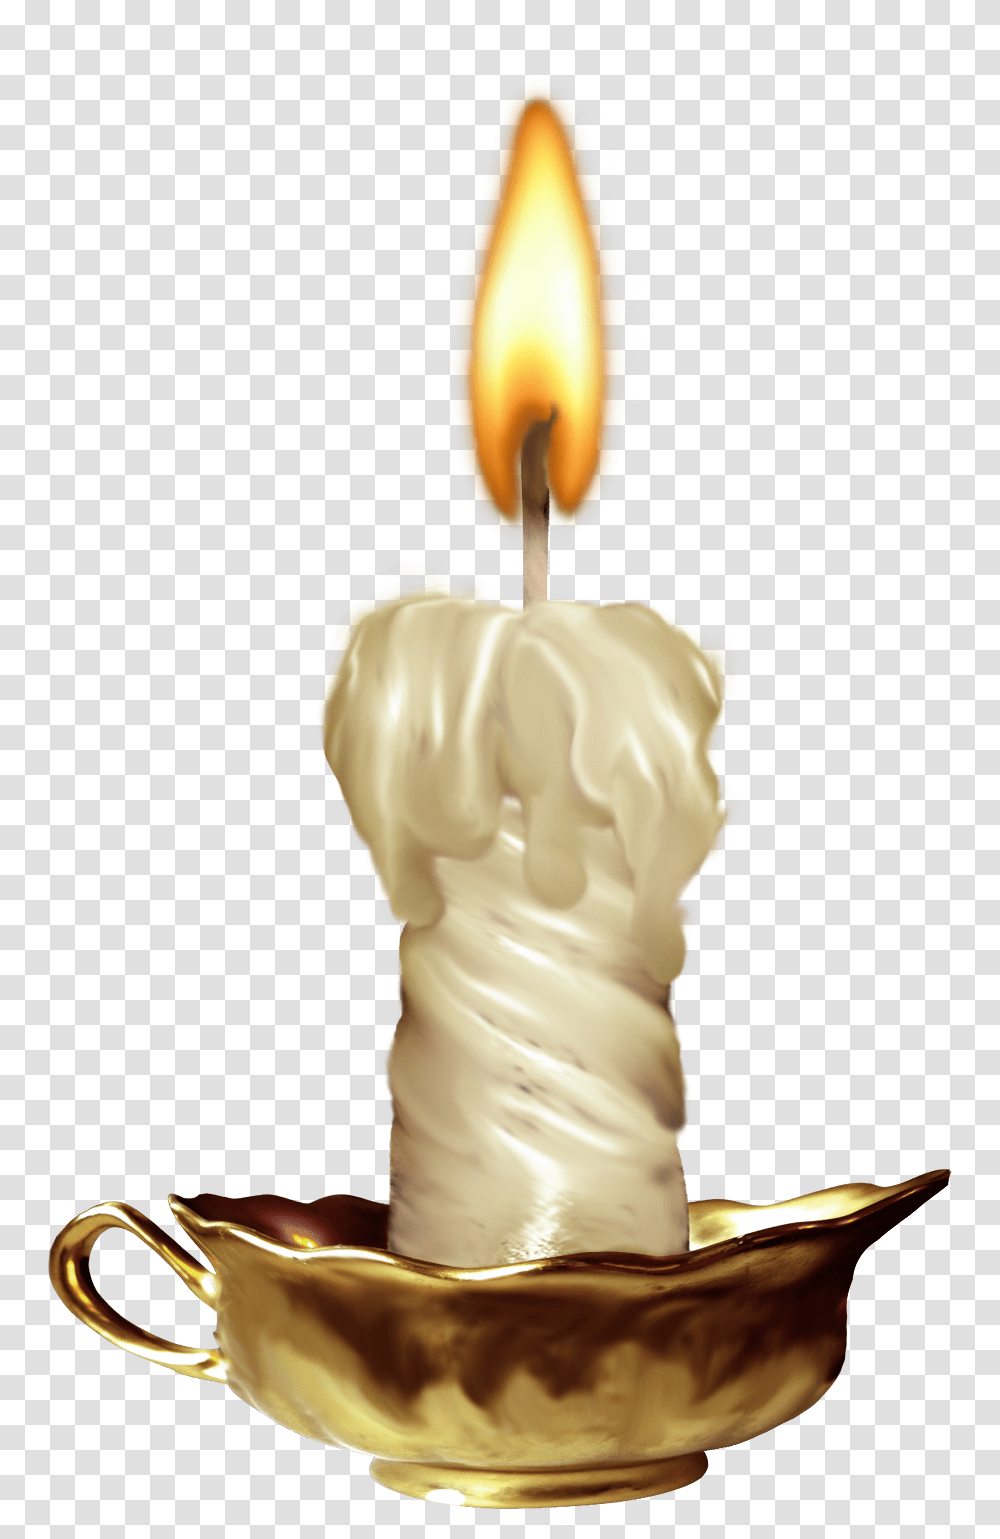 Candle Flame Candle Light, Fire Transparent Png